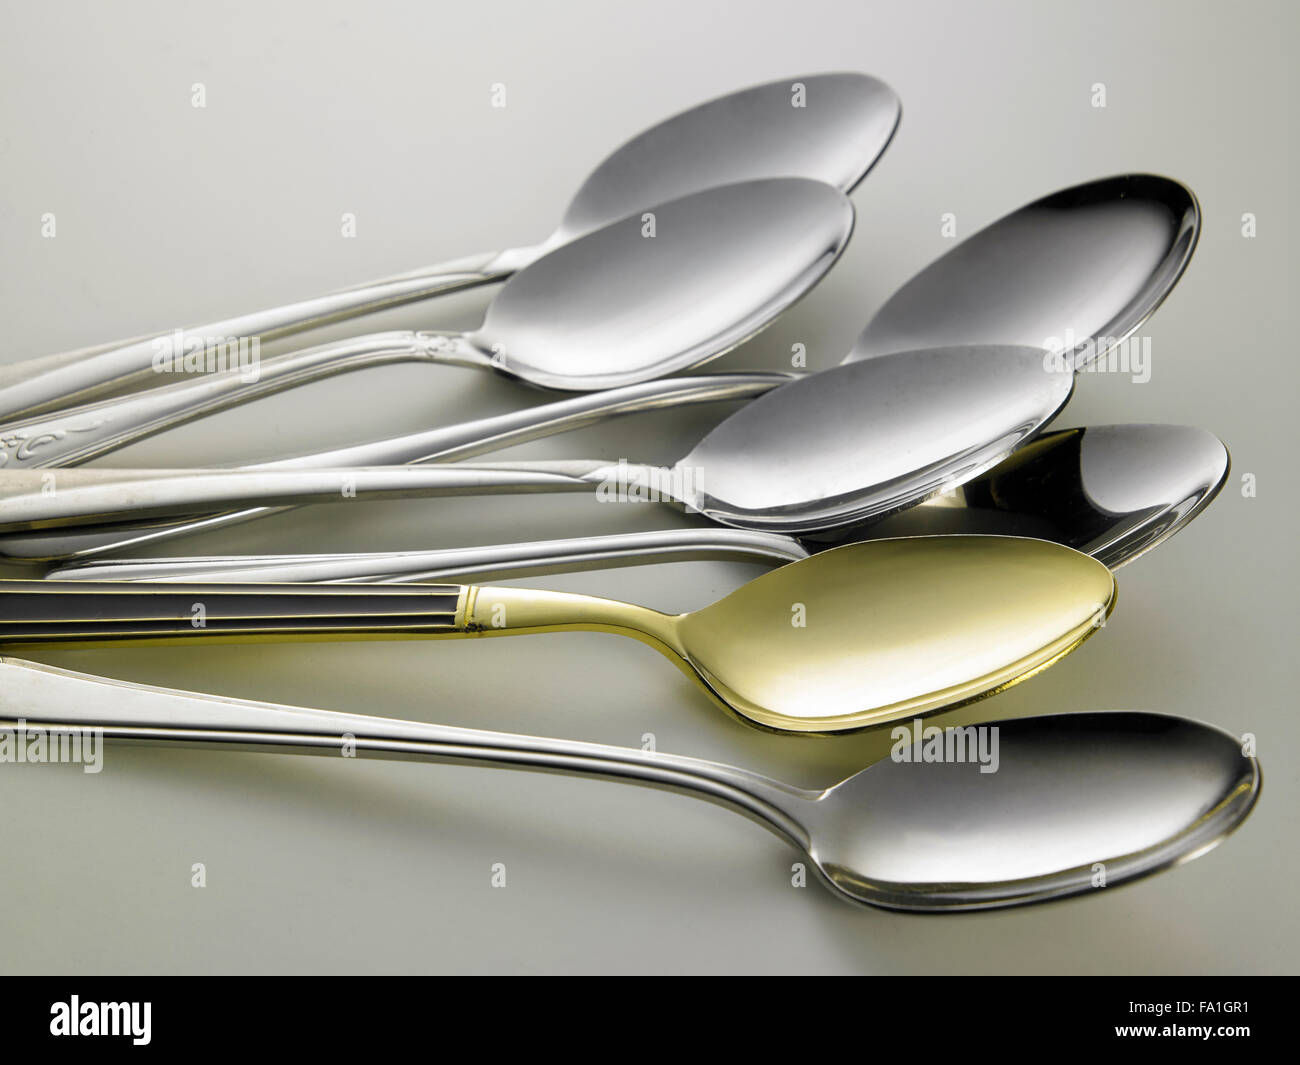 golden spoon stand out from other spoons Stock Photo